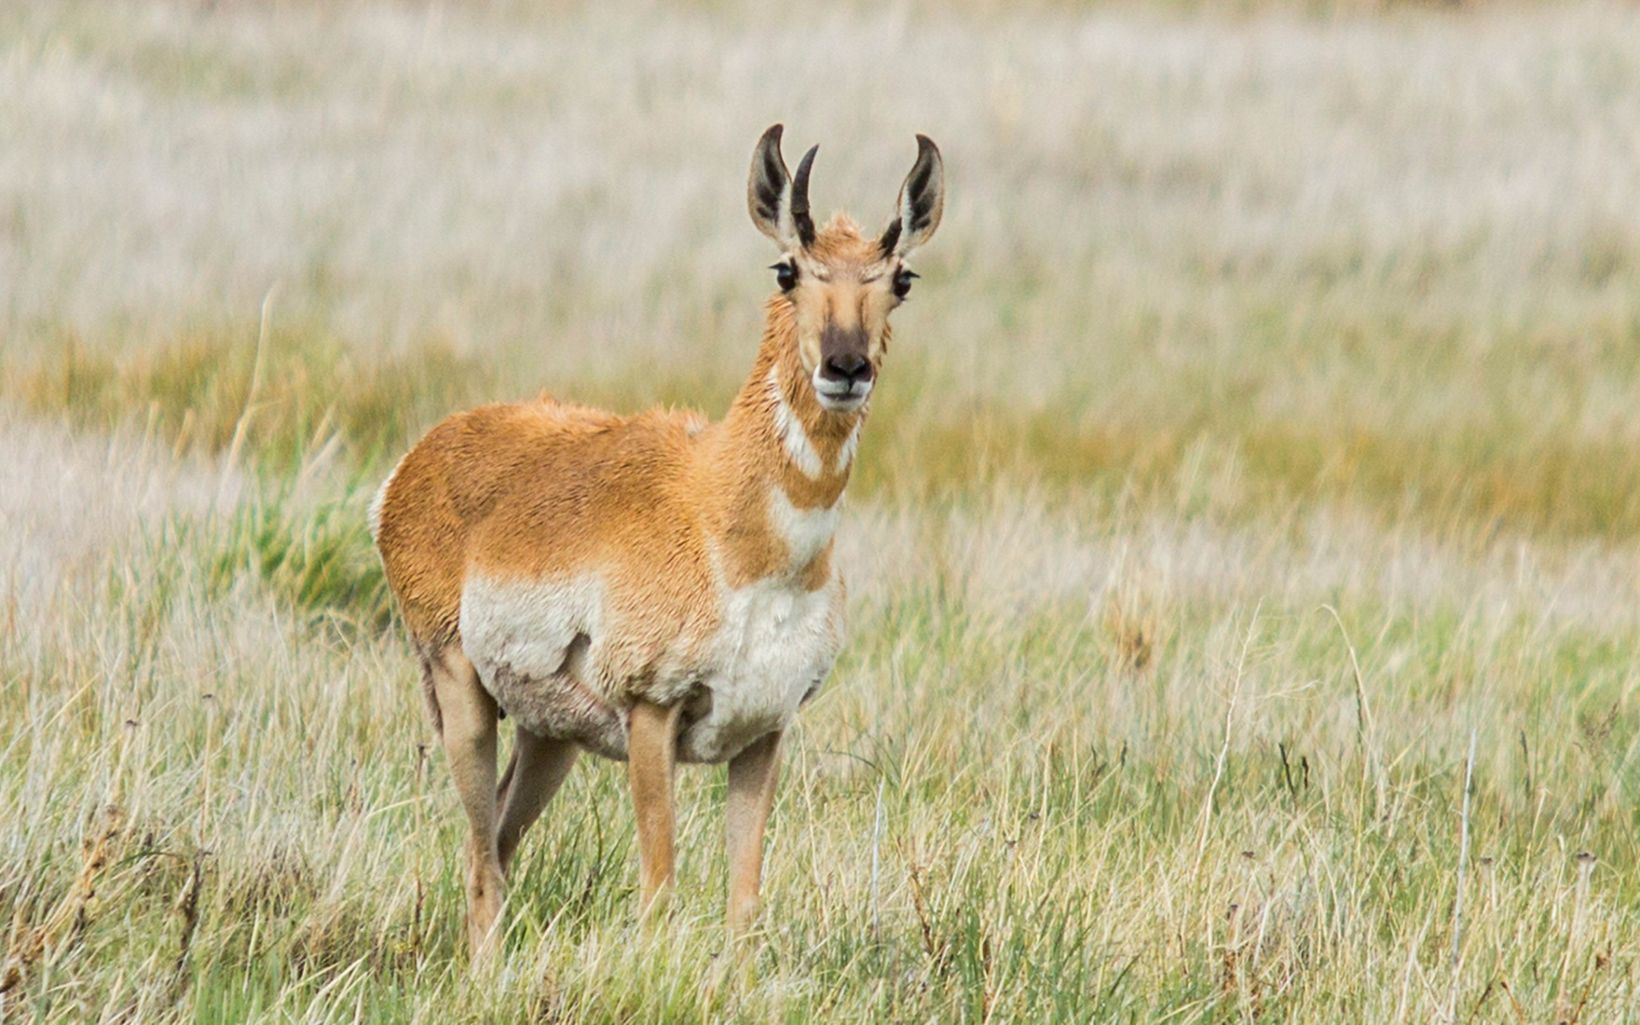 Pronghorn antelope in Nevada's sagebrush country in the Great Basin. © Simon Williams/TNC